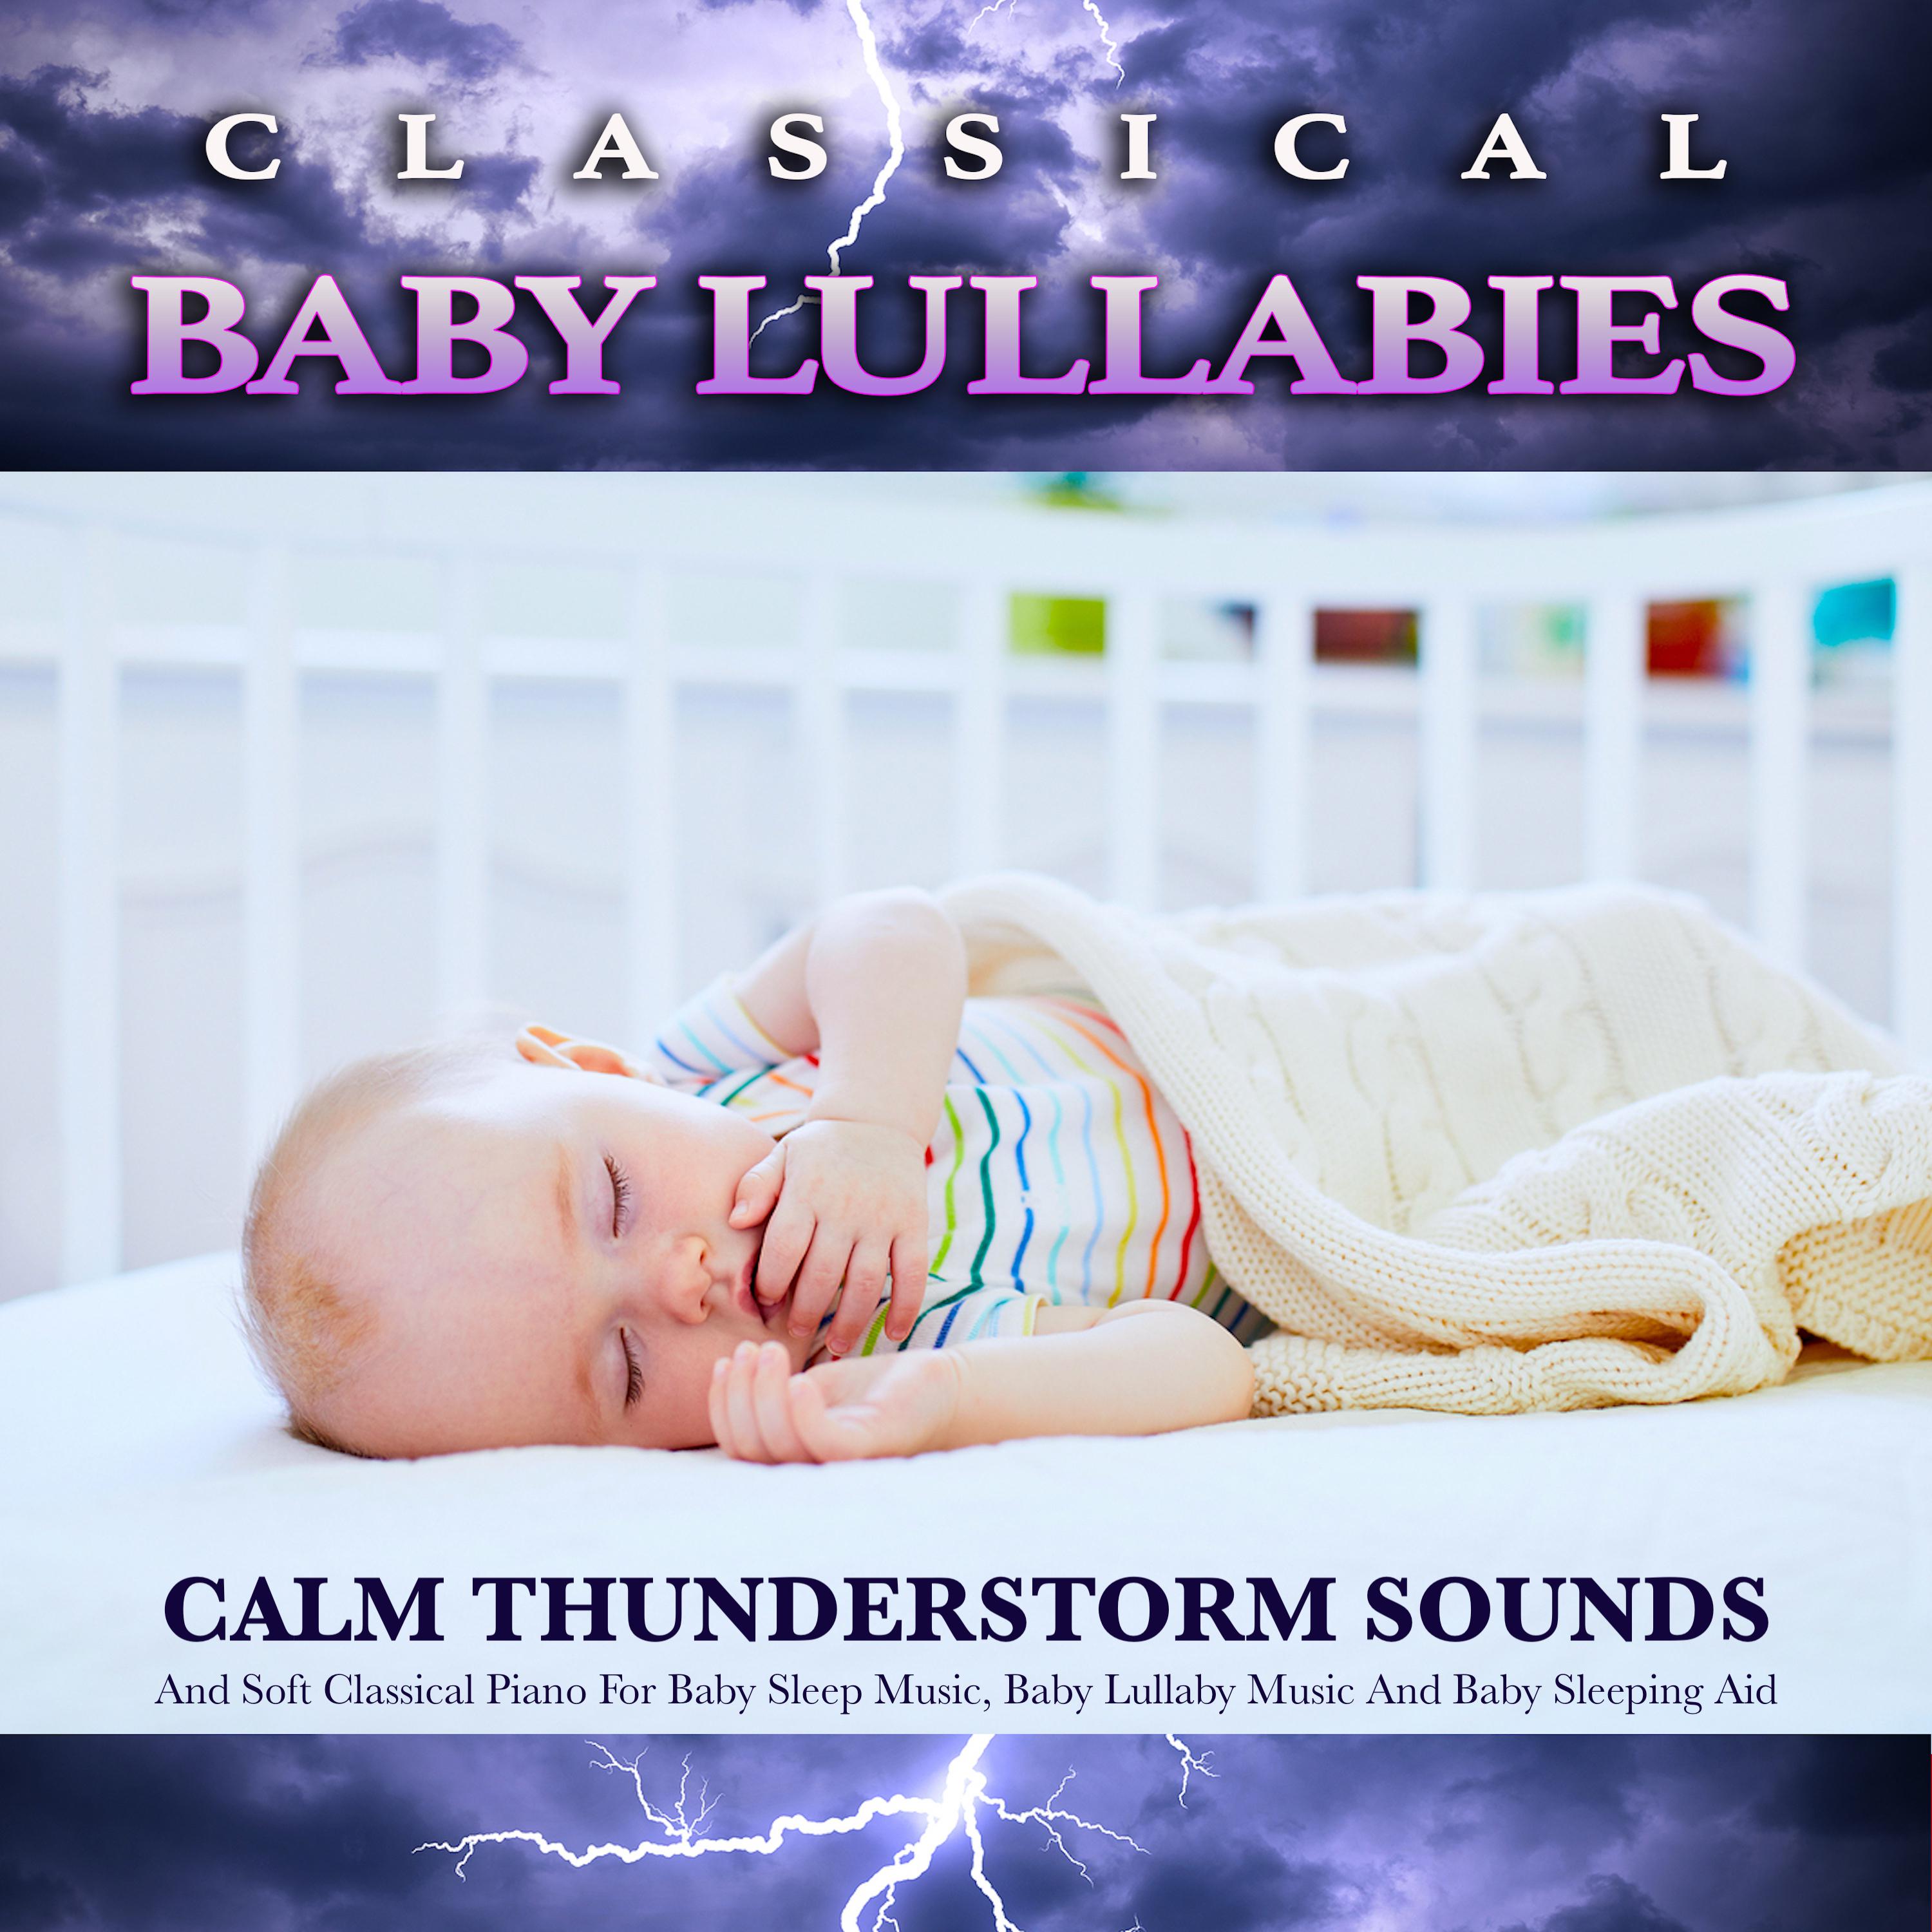 Pathetique - Beethoven - Baby Lullaby - Baby Sleep Music - Classical Piano and Thunderstorm Sounds For Sleep